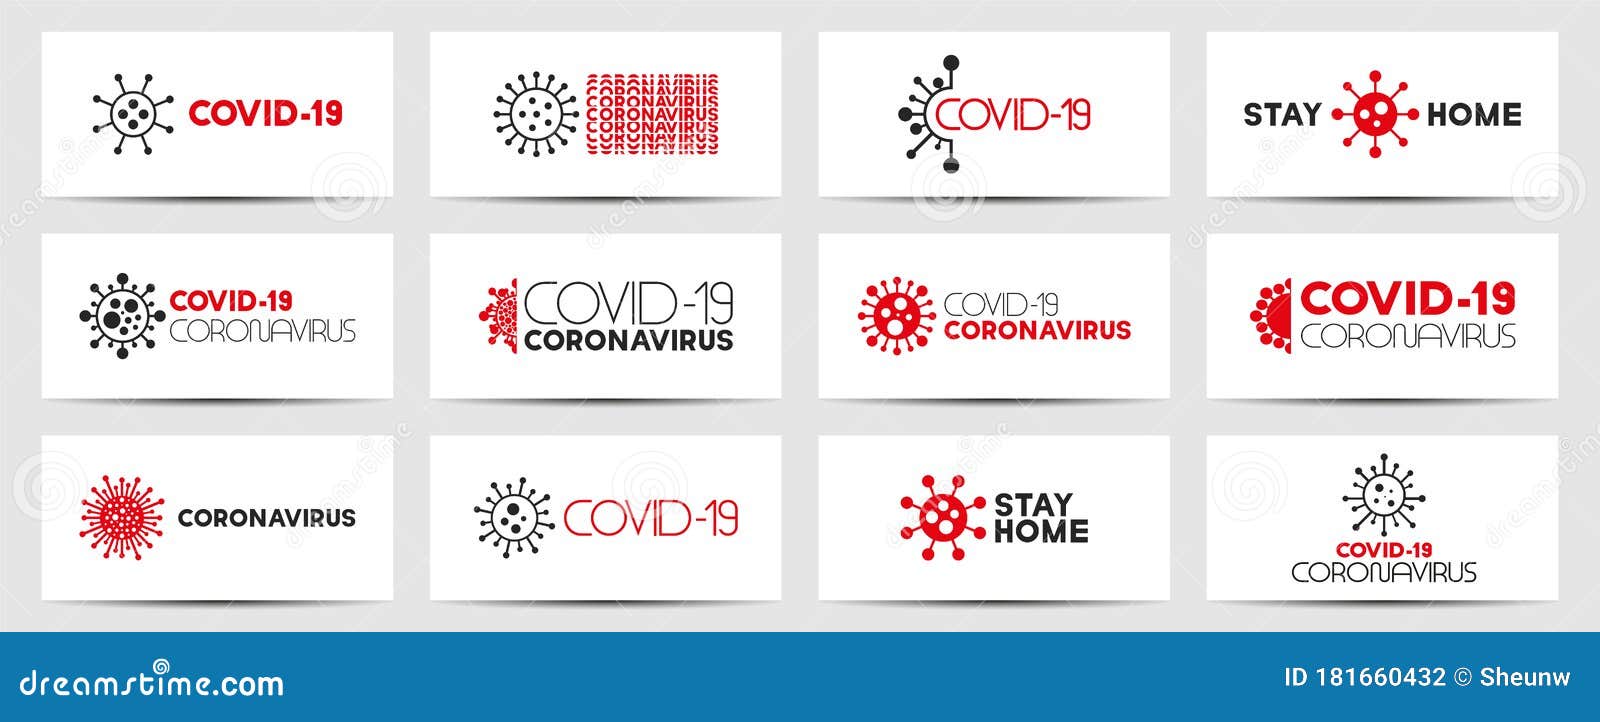 collection of virus contemporary flyers, covers, templates, posters, cards. covid-19 concept backgrounds. coronavirus